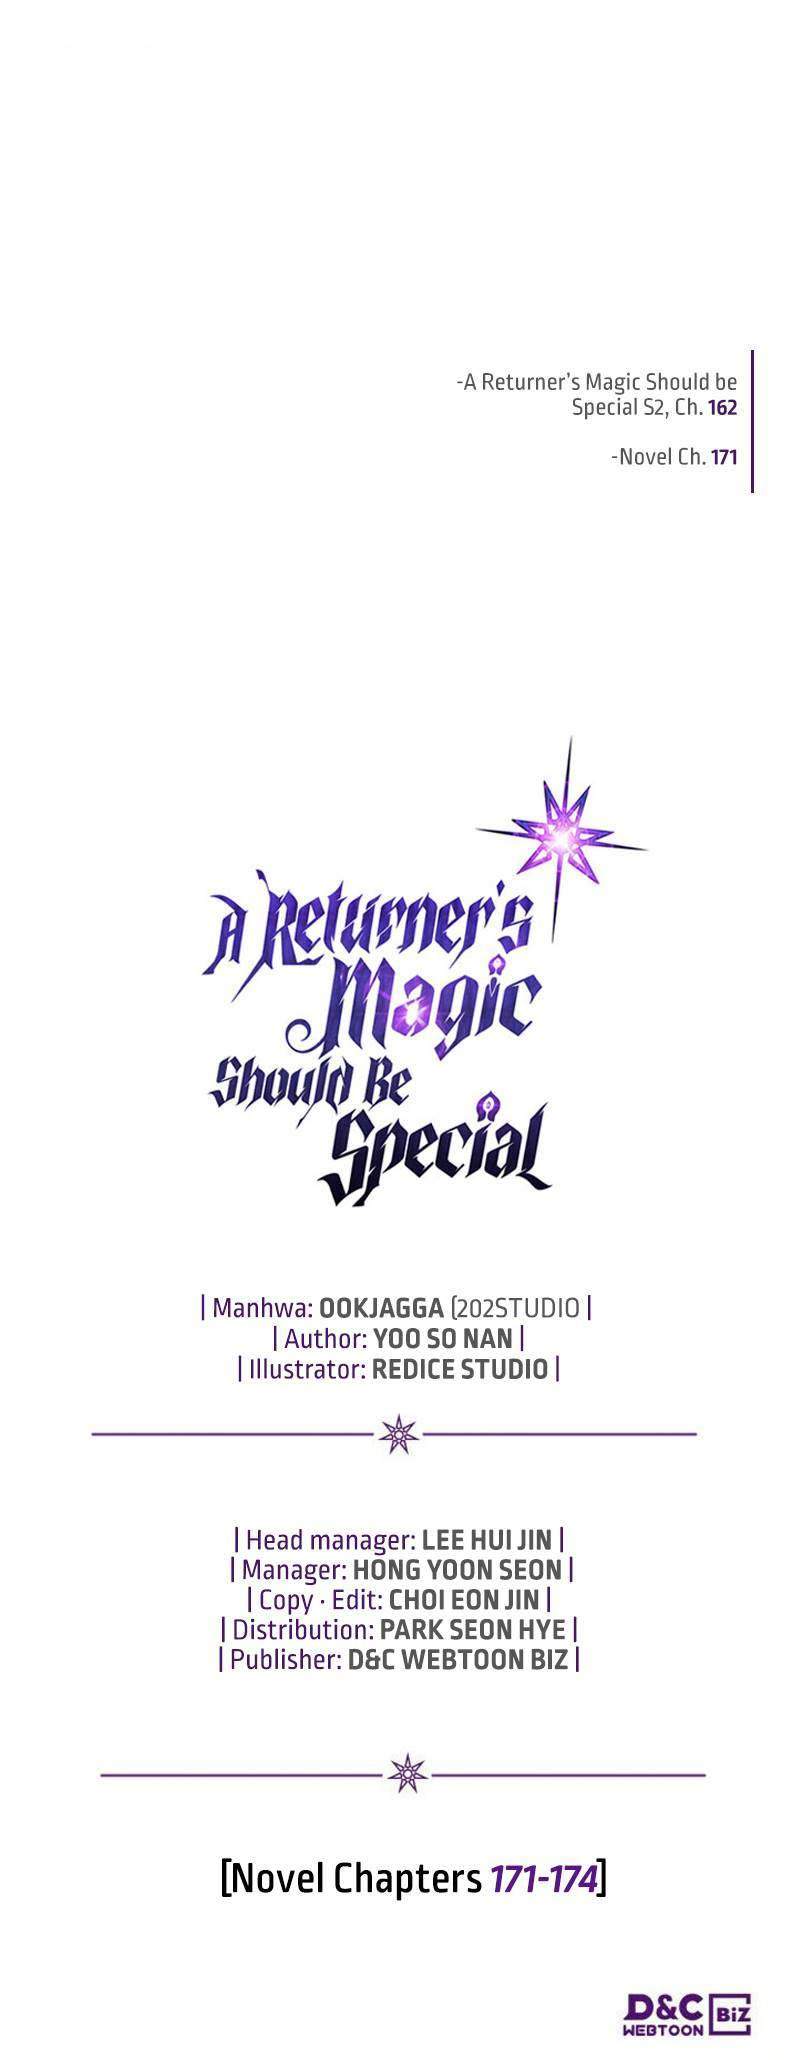 A Returner’s Magic Should Be Special Chapter 162